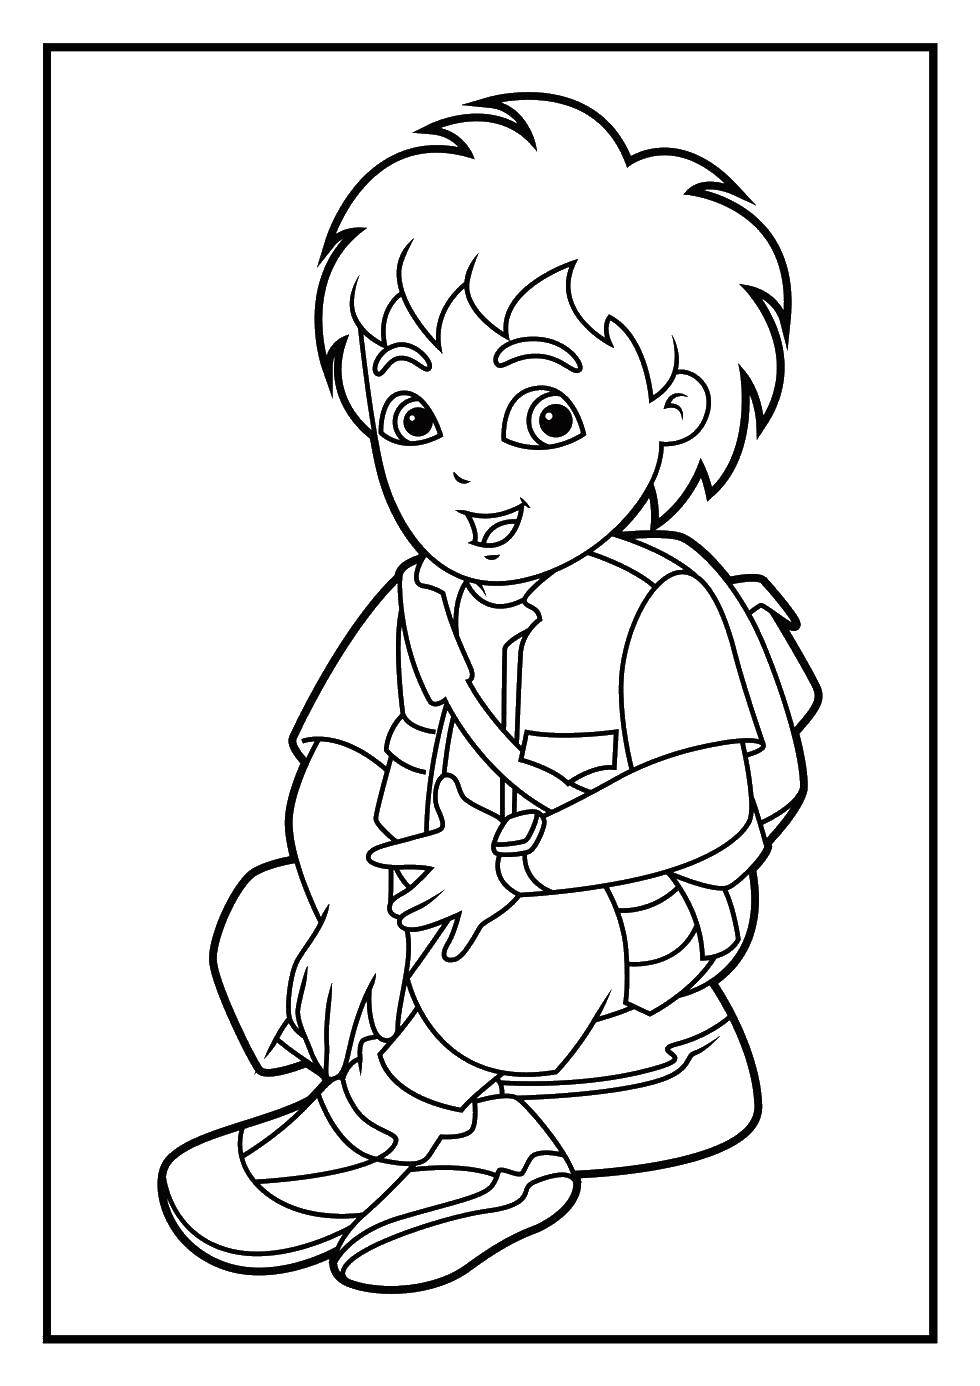 Coloring Diego, go. Category Diego. Tags:  Diego, go.